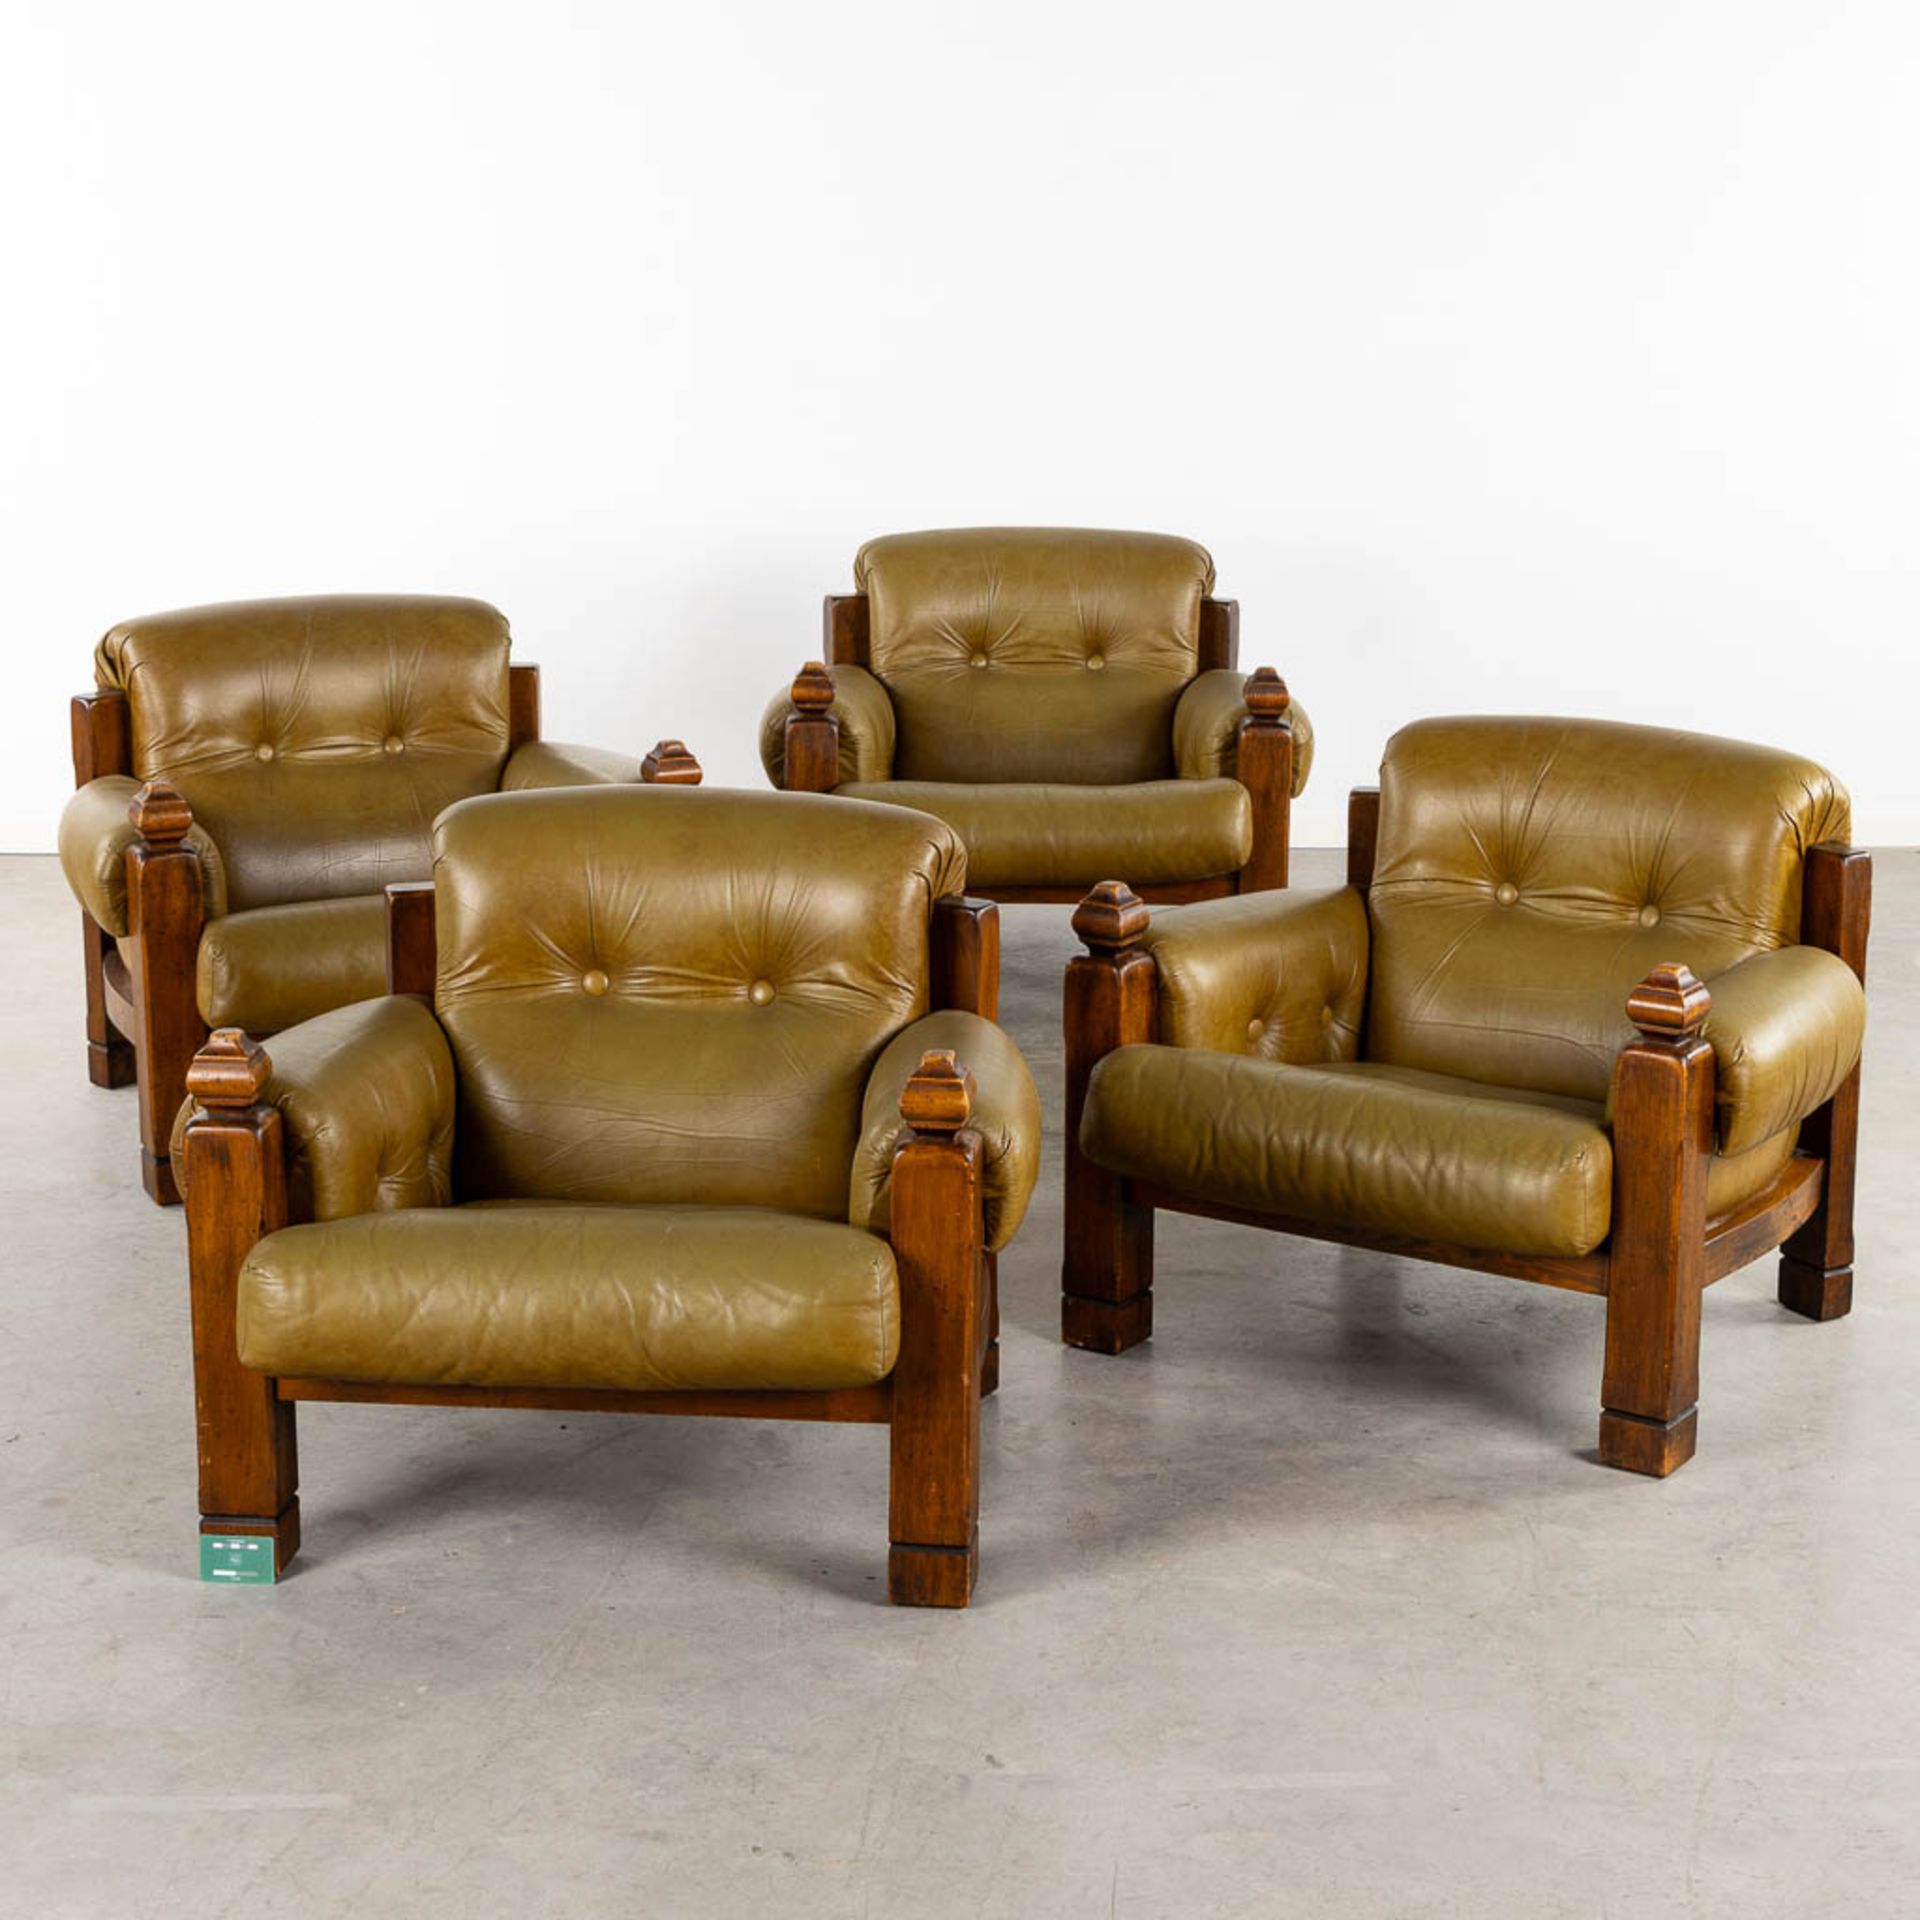 Four identical leather and wood lounge chairs, Circa 1960. (L:94 x W:96 x H:78 cm) - Bild 2 aus 10